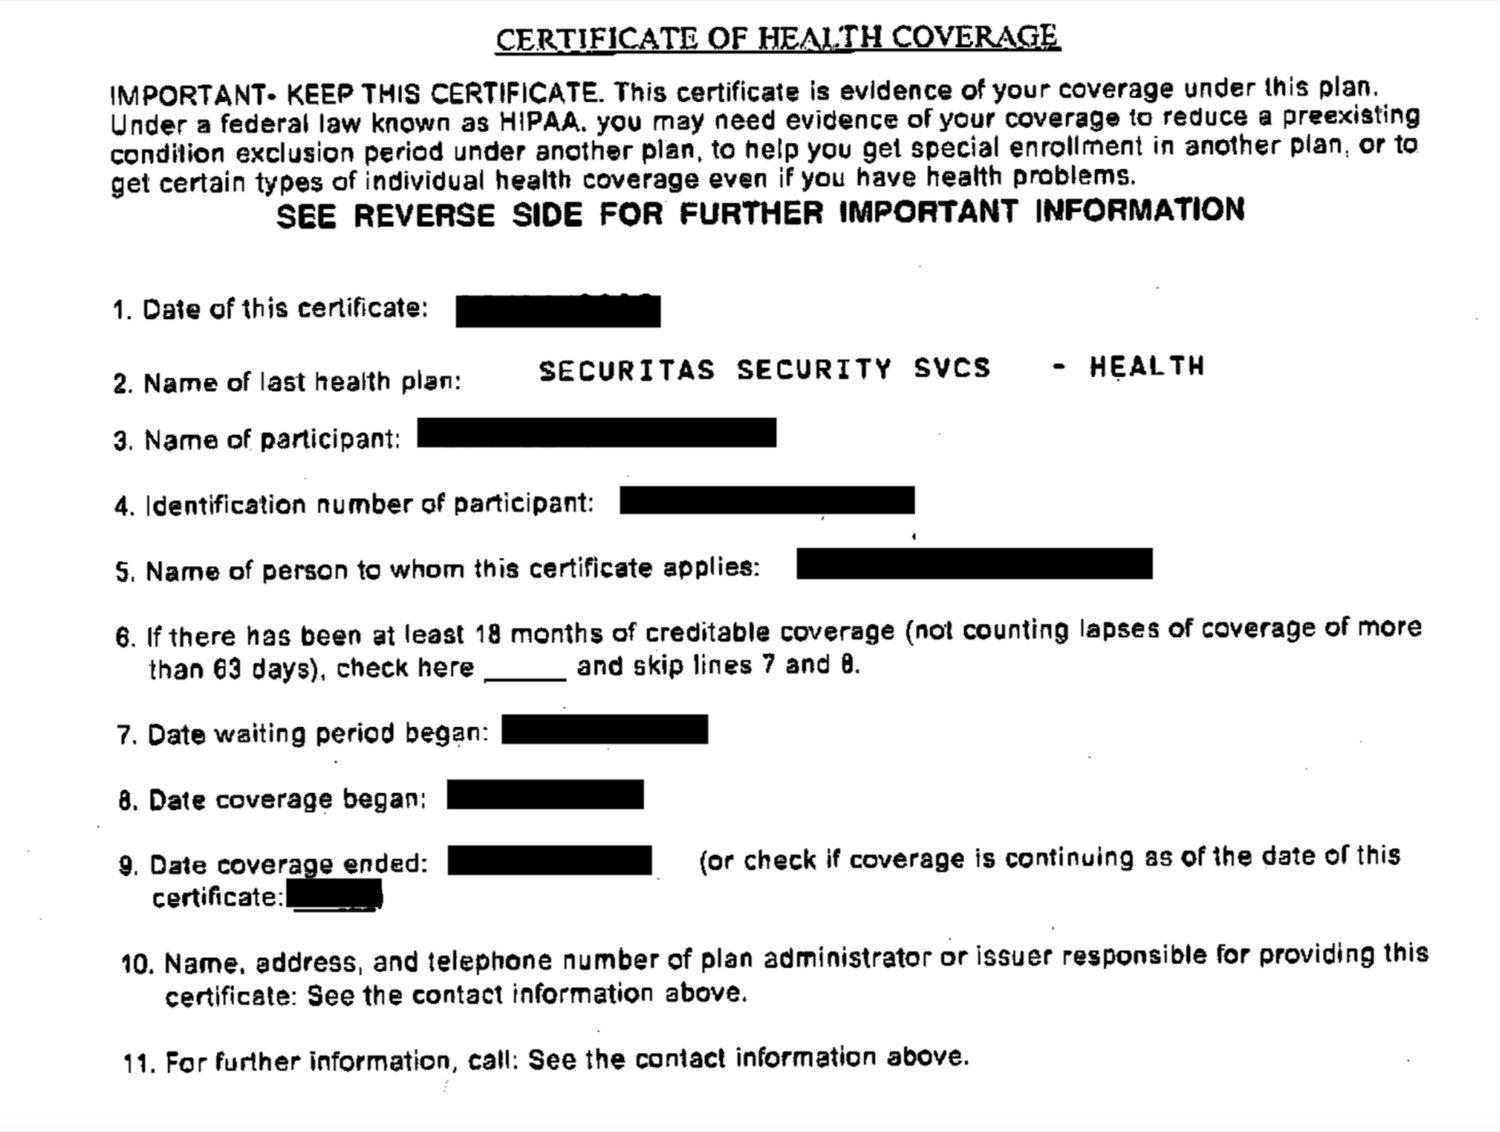 Stolen information includes personal health care data.